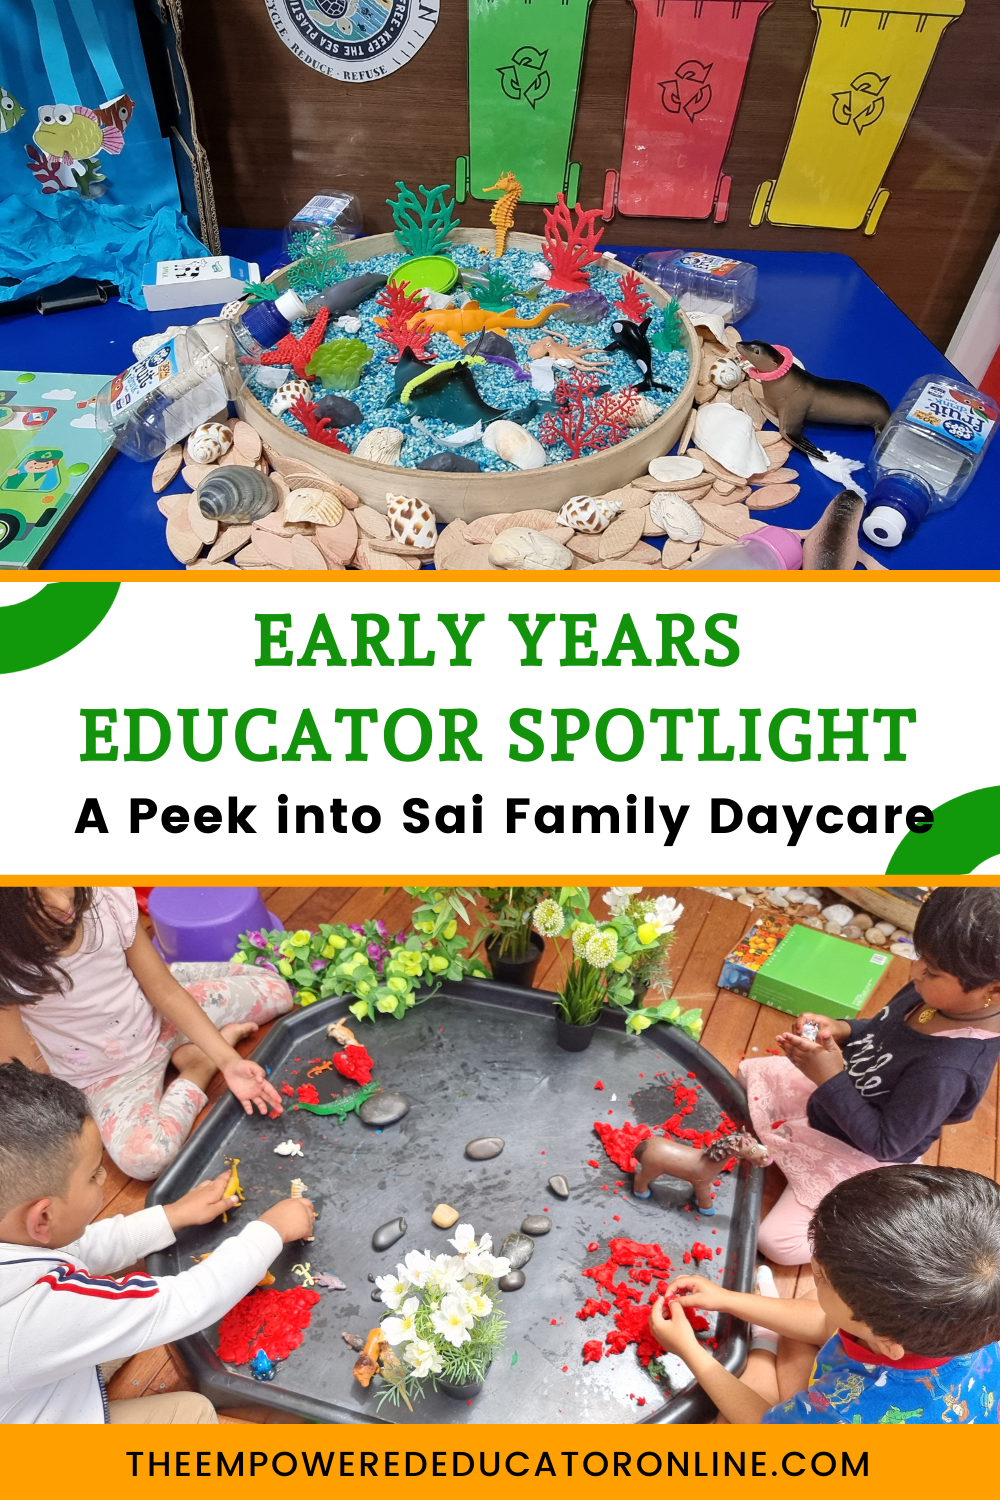 Get ideas from real family daycare educator environments with this new blog series. We put the spotlight this week on Sai Family Daycare.